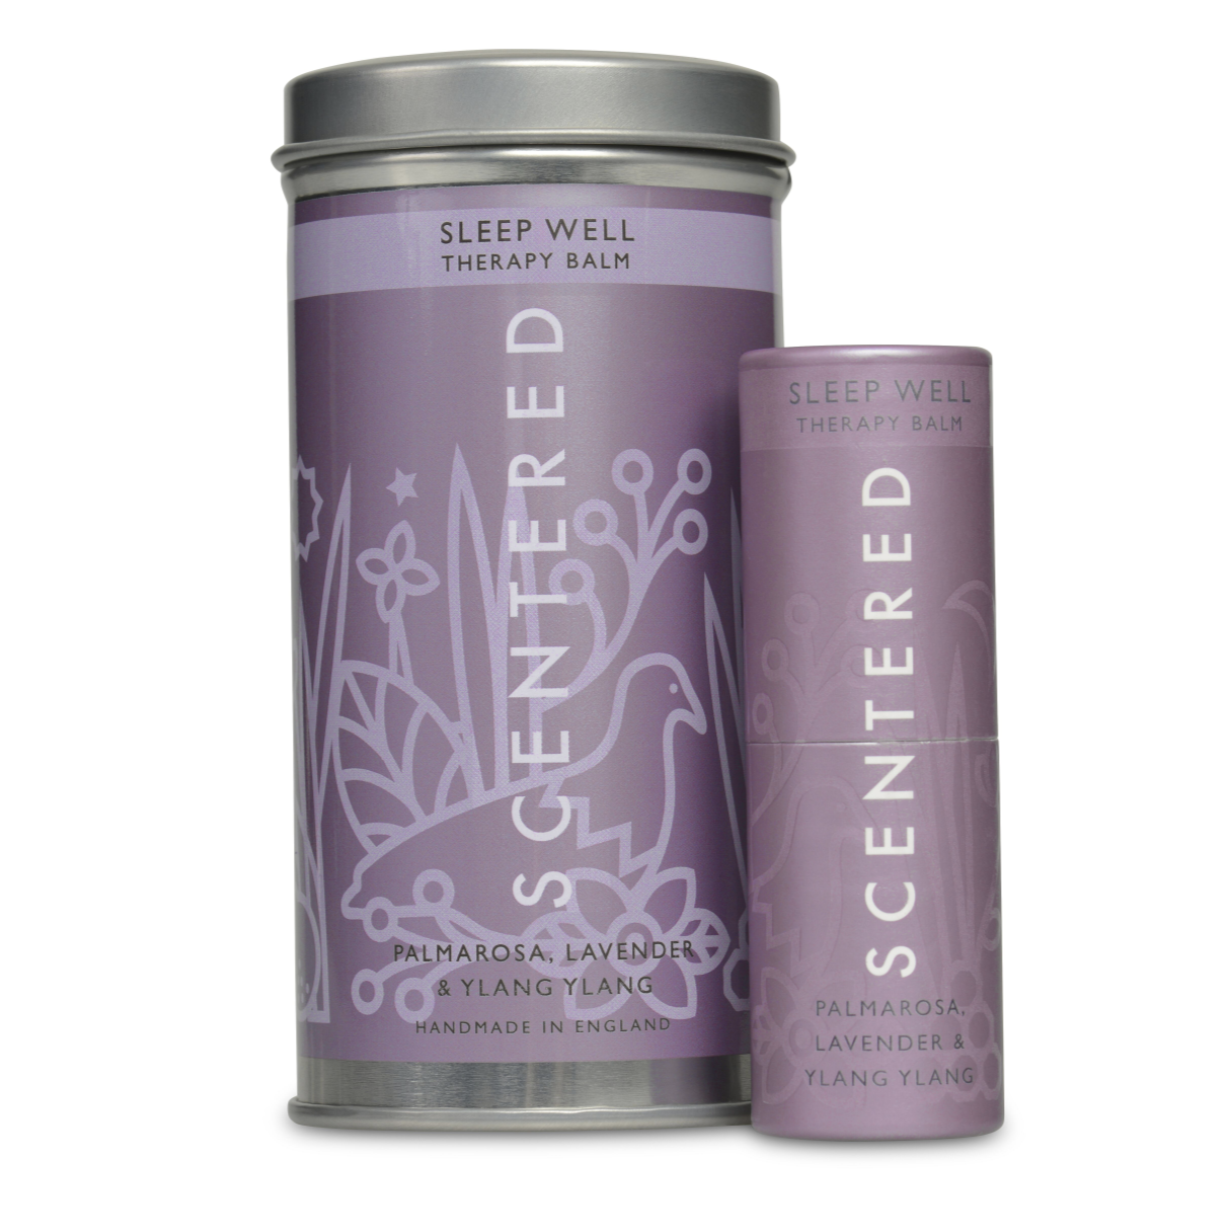 Sleep Well Therapy Balm | Scentered